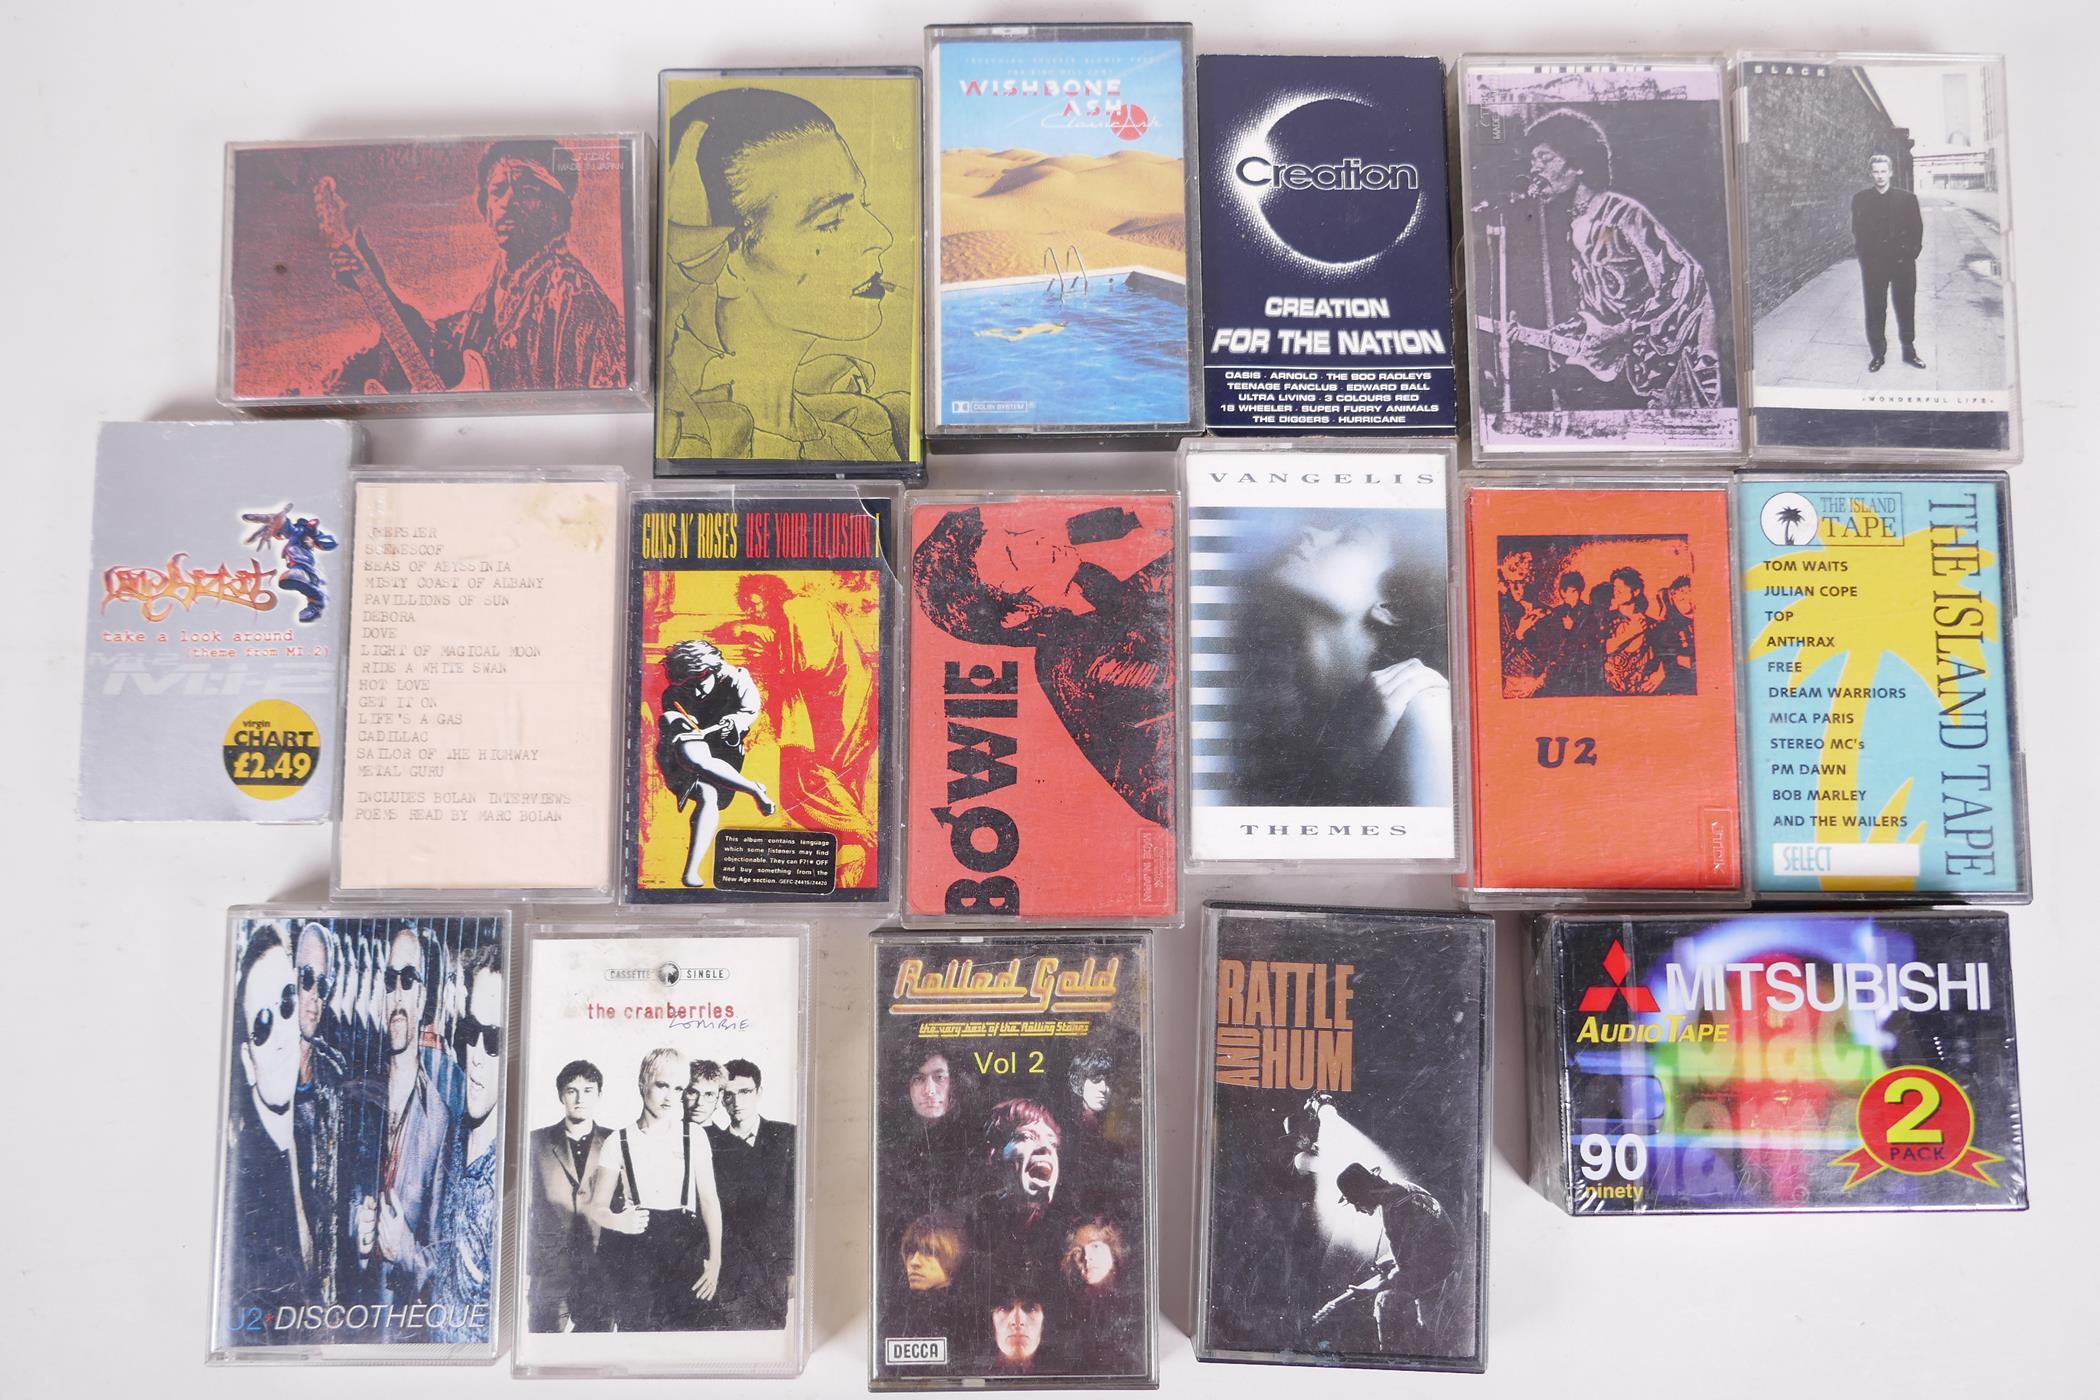 A quantity of 1970s and 80s music cassette tapes including some bootlegs